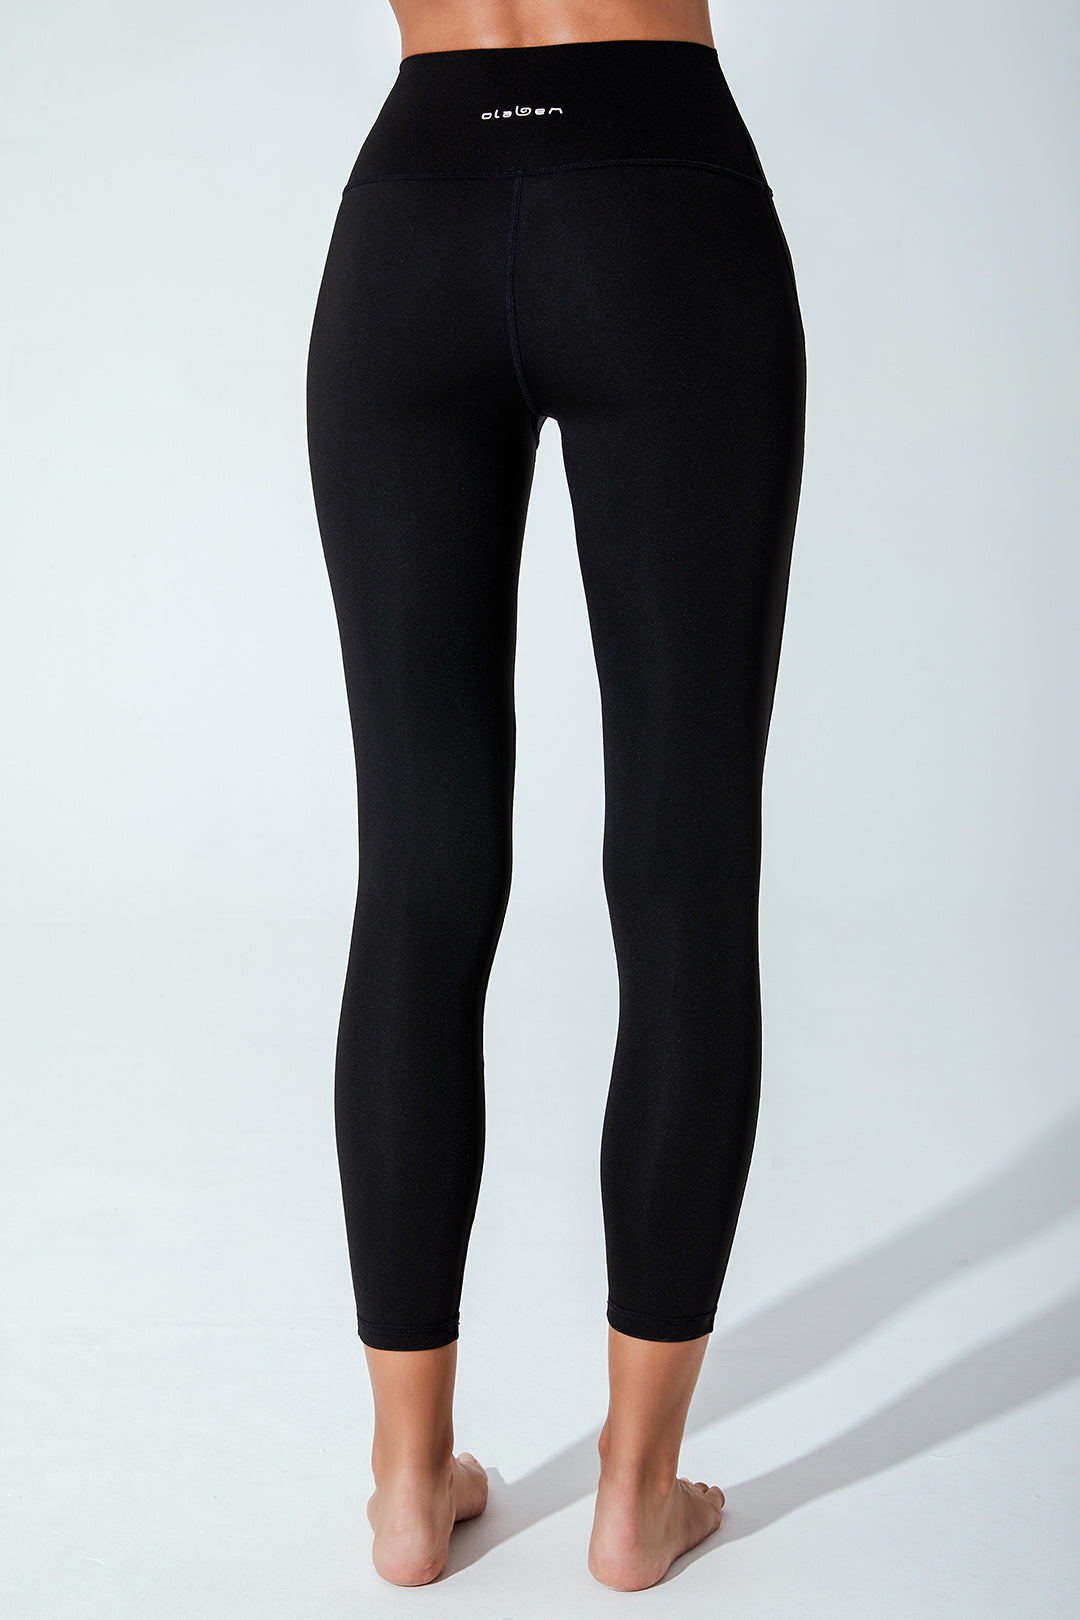 Black Luziana Bmesh Legging for Women - Stylish and Comfortable Activewear for Fitness Enthusiasts.